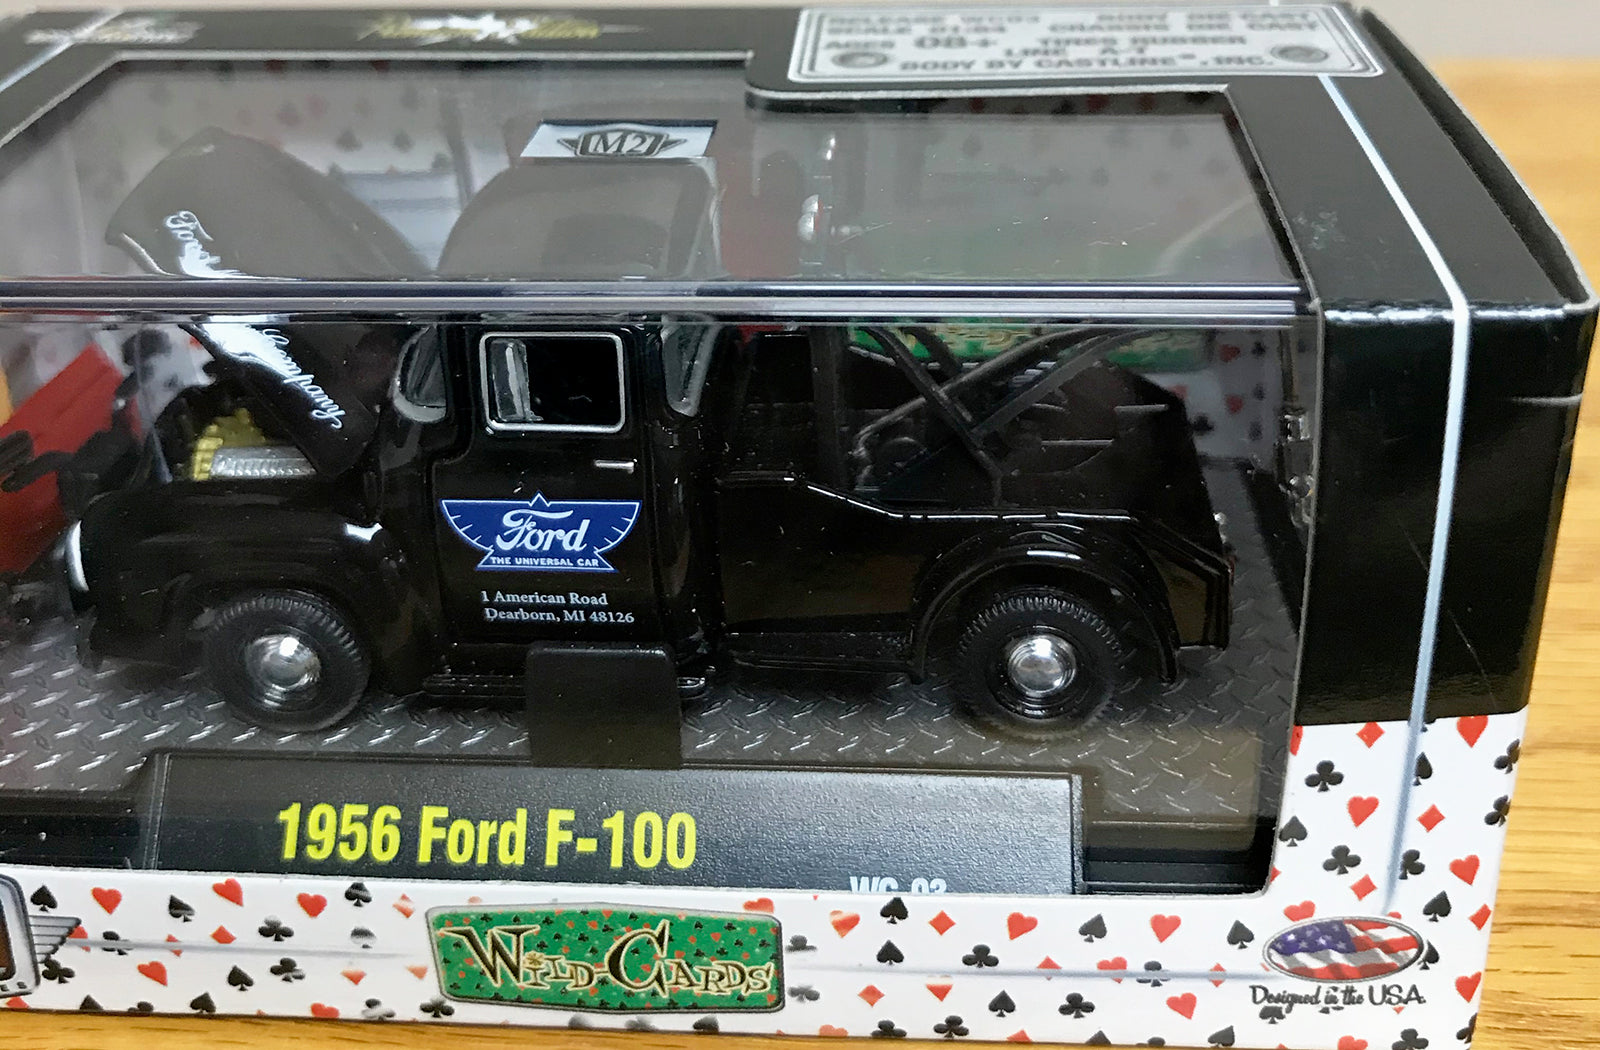 S 1956 Ford F-100 Tow Truck - Black